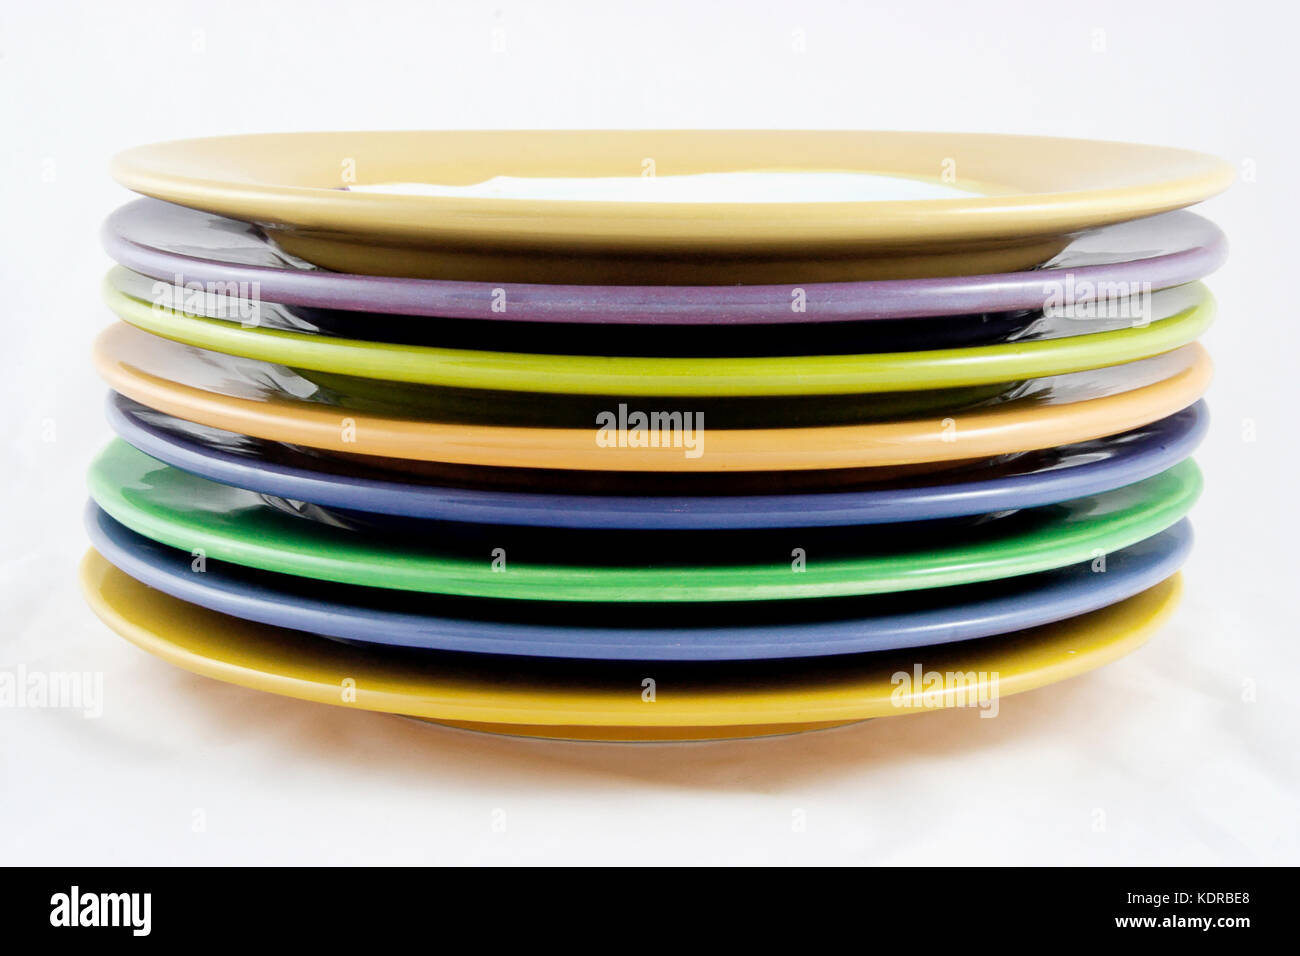 Side view of rims of handmade colorful ceramic plates. Isolated. Stock Photo